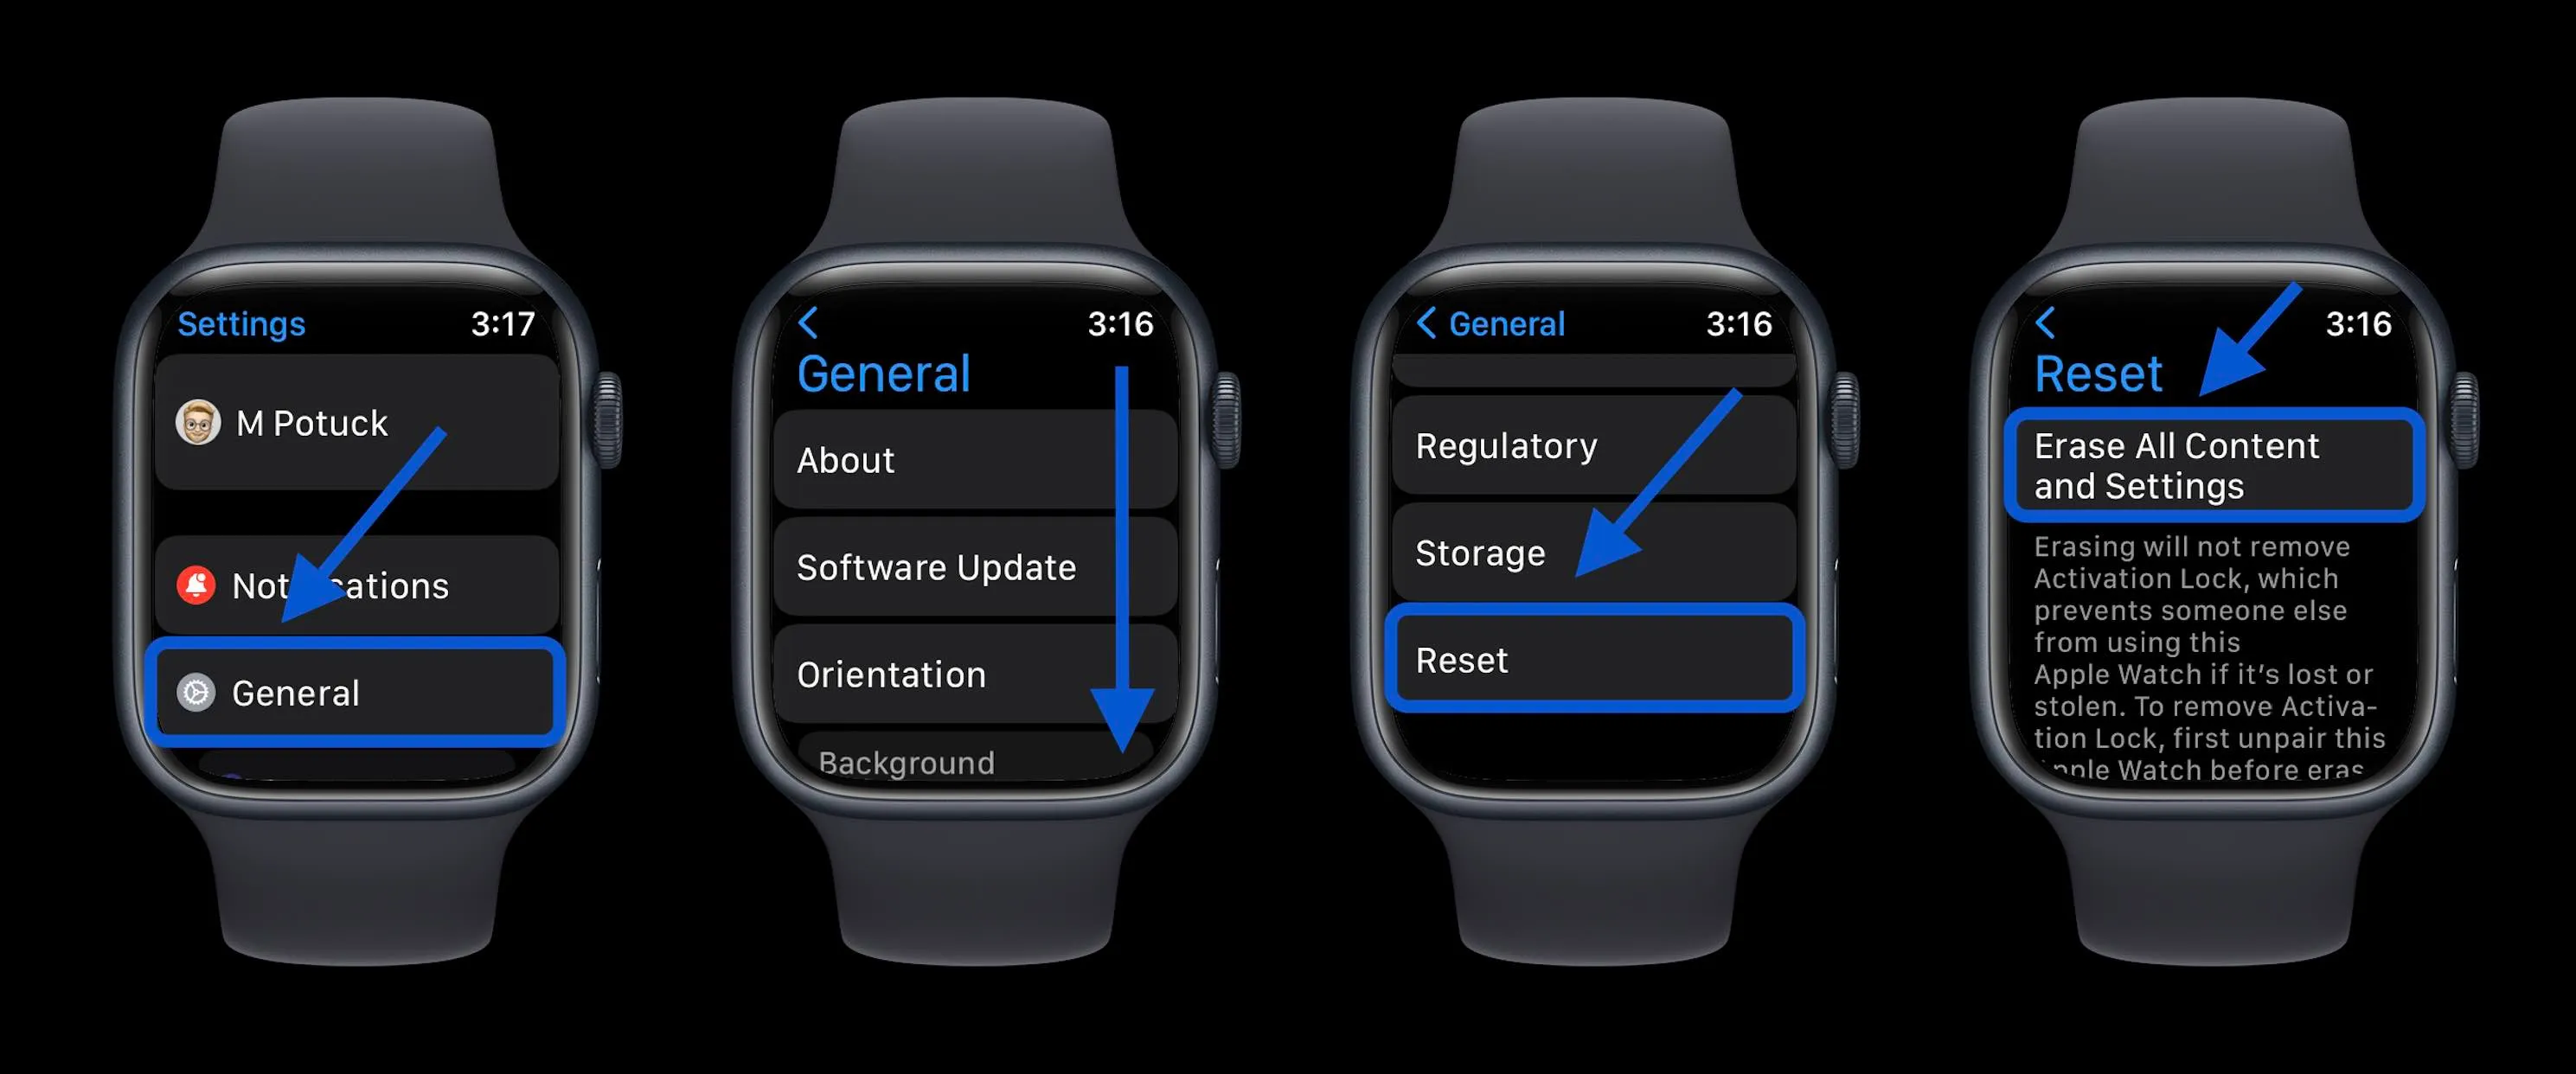 How To Erase Apple Watch